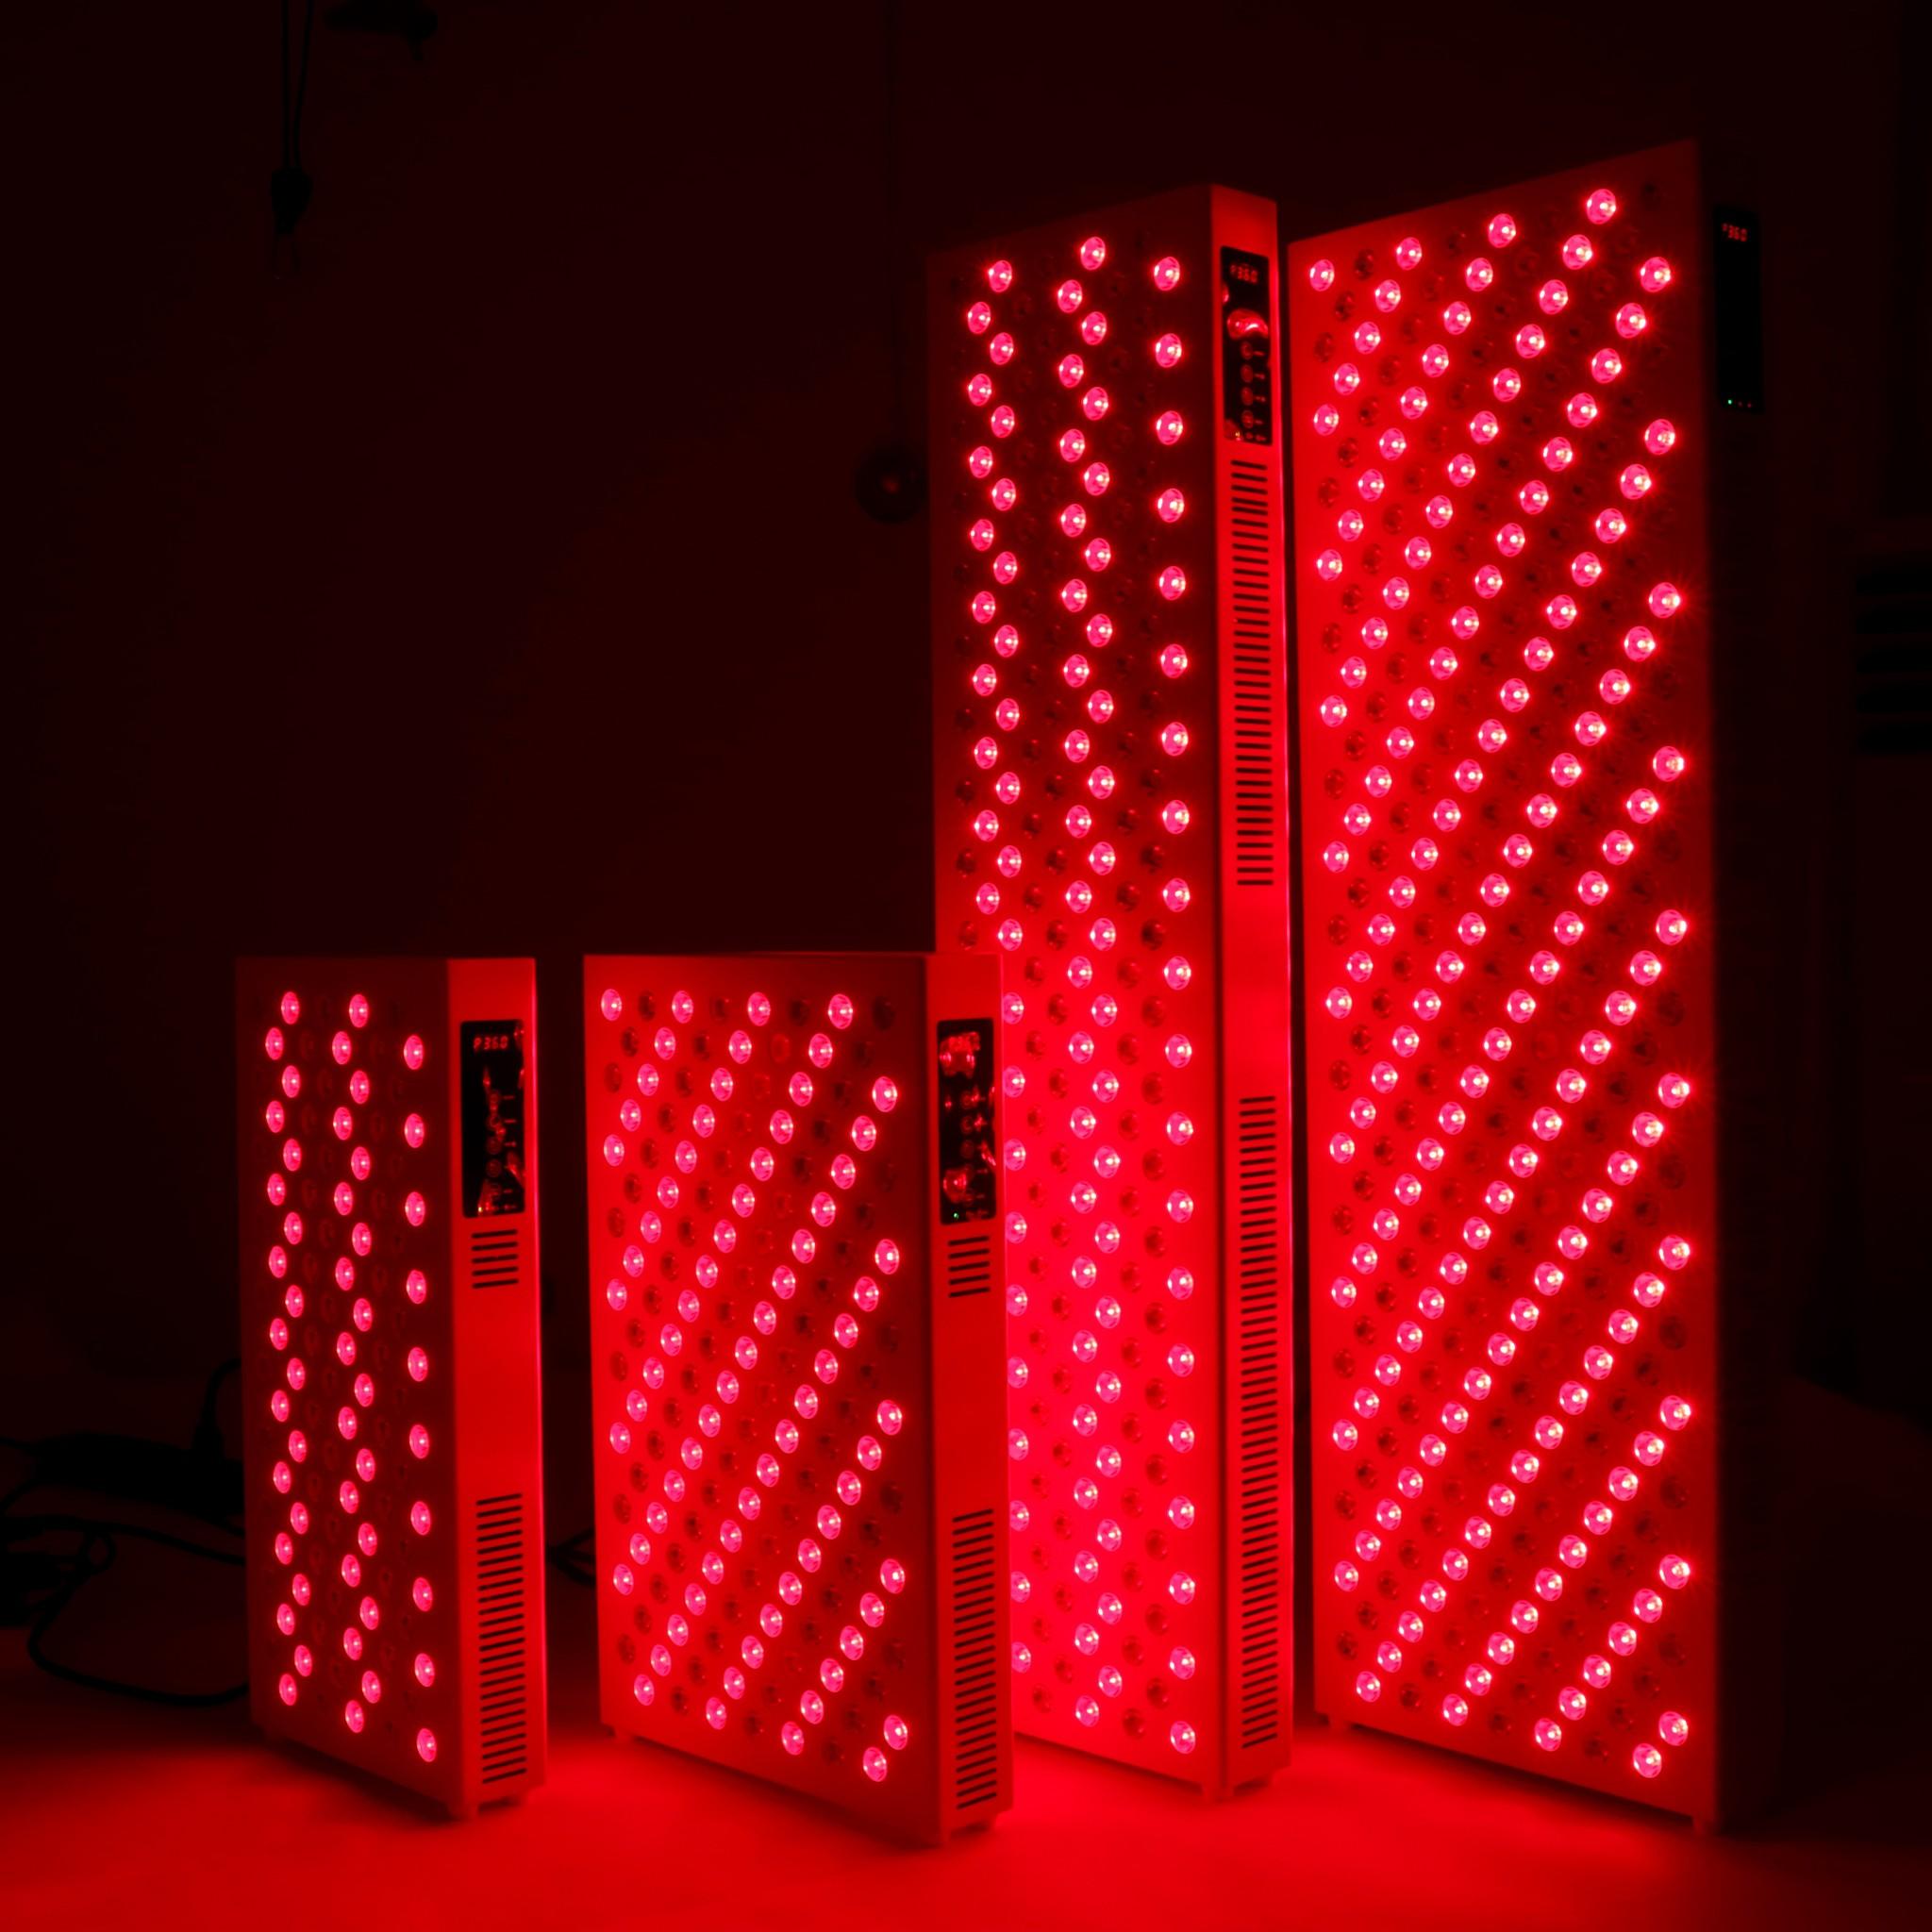 Product: Red light therapy panels